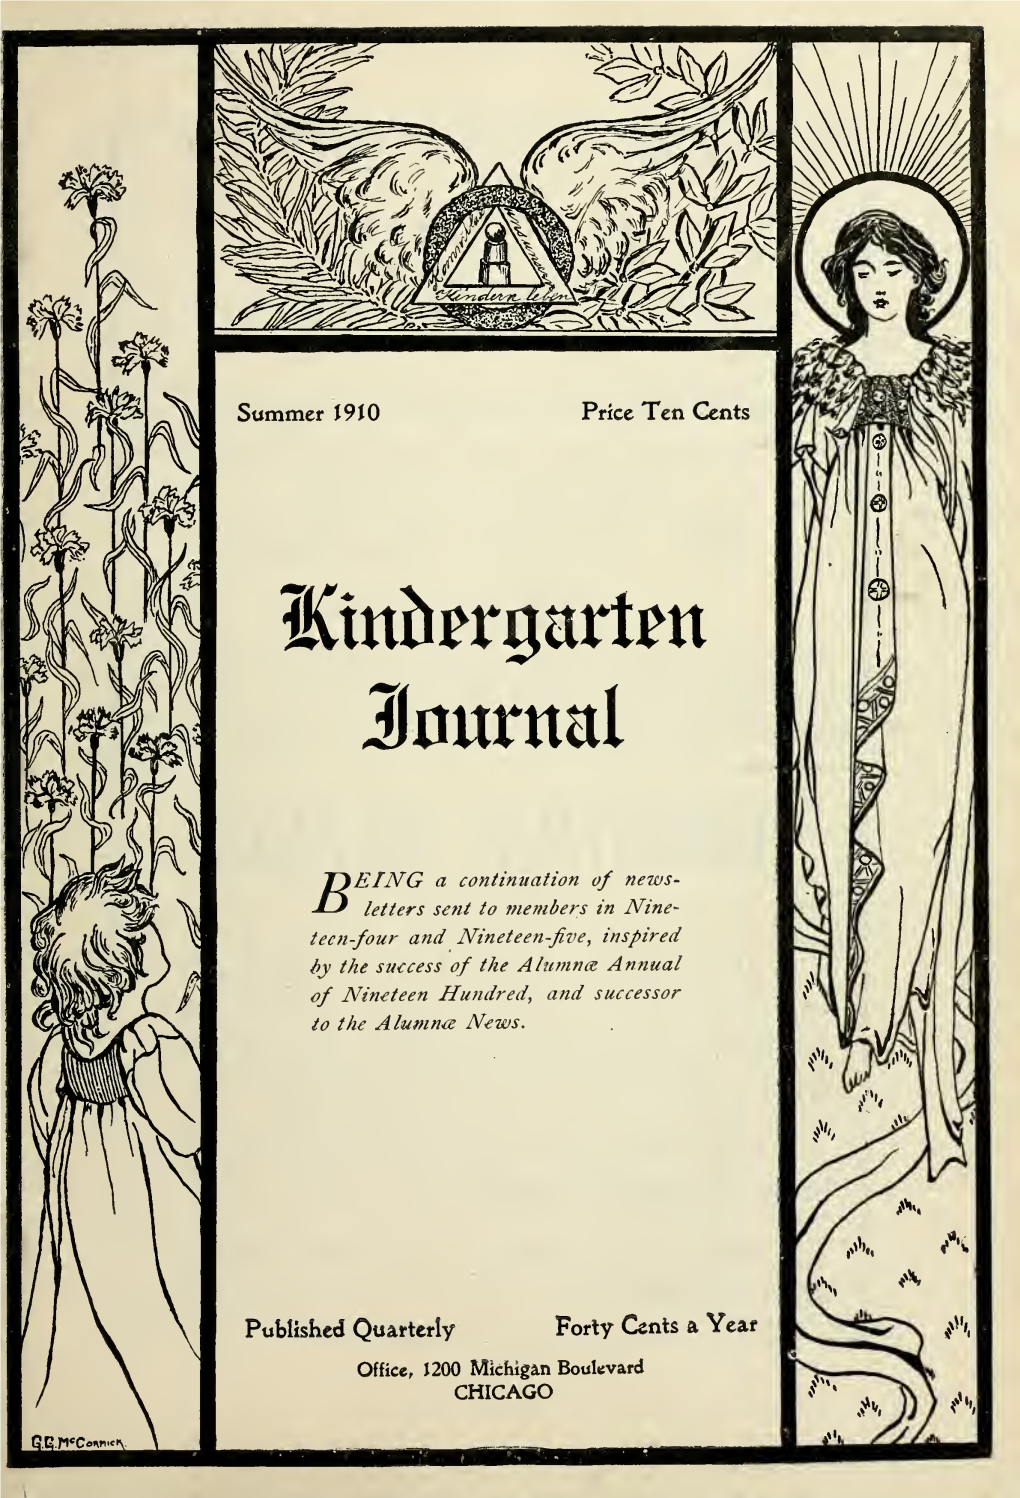 THE KINDERGARTEN JOURNAL Reserves the Right to Print, As Space Permits, Over the Writer's Signature, Articles Receiving '''Honorable Mention."